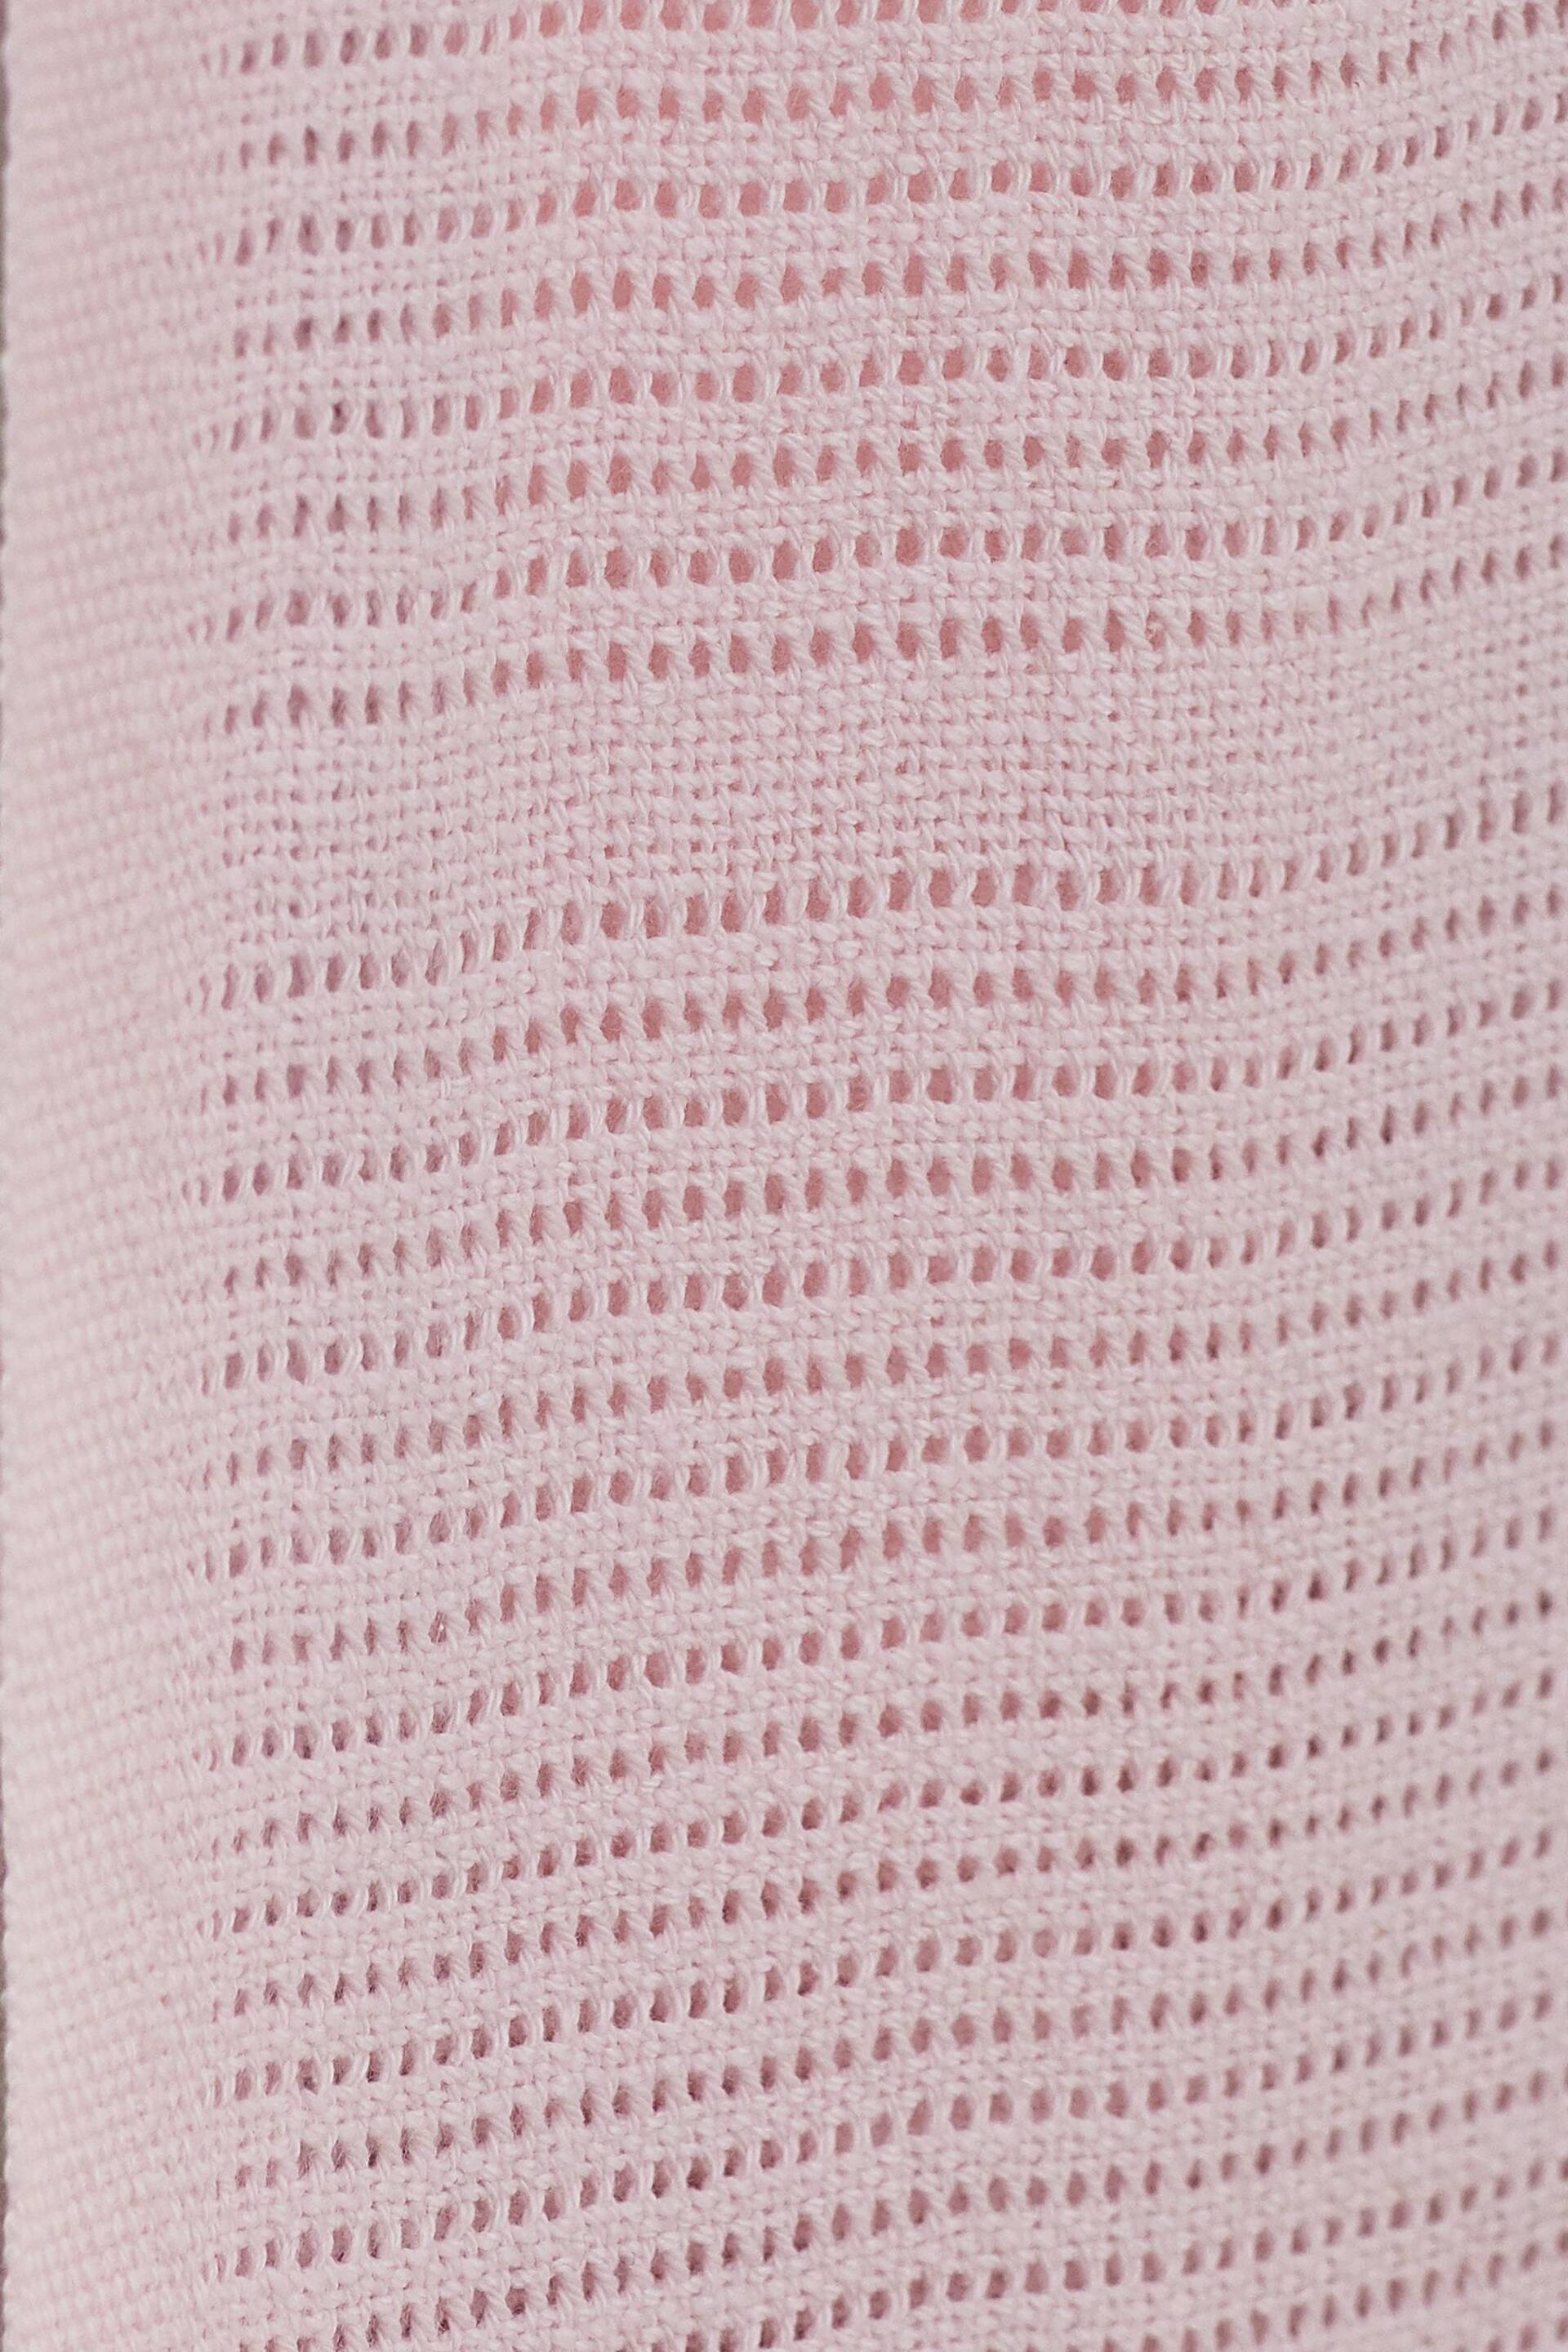 Pink Baby 100% Cotton Cellular Blanket - Image 2 of 7